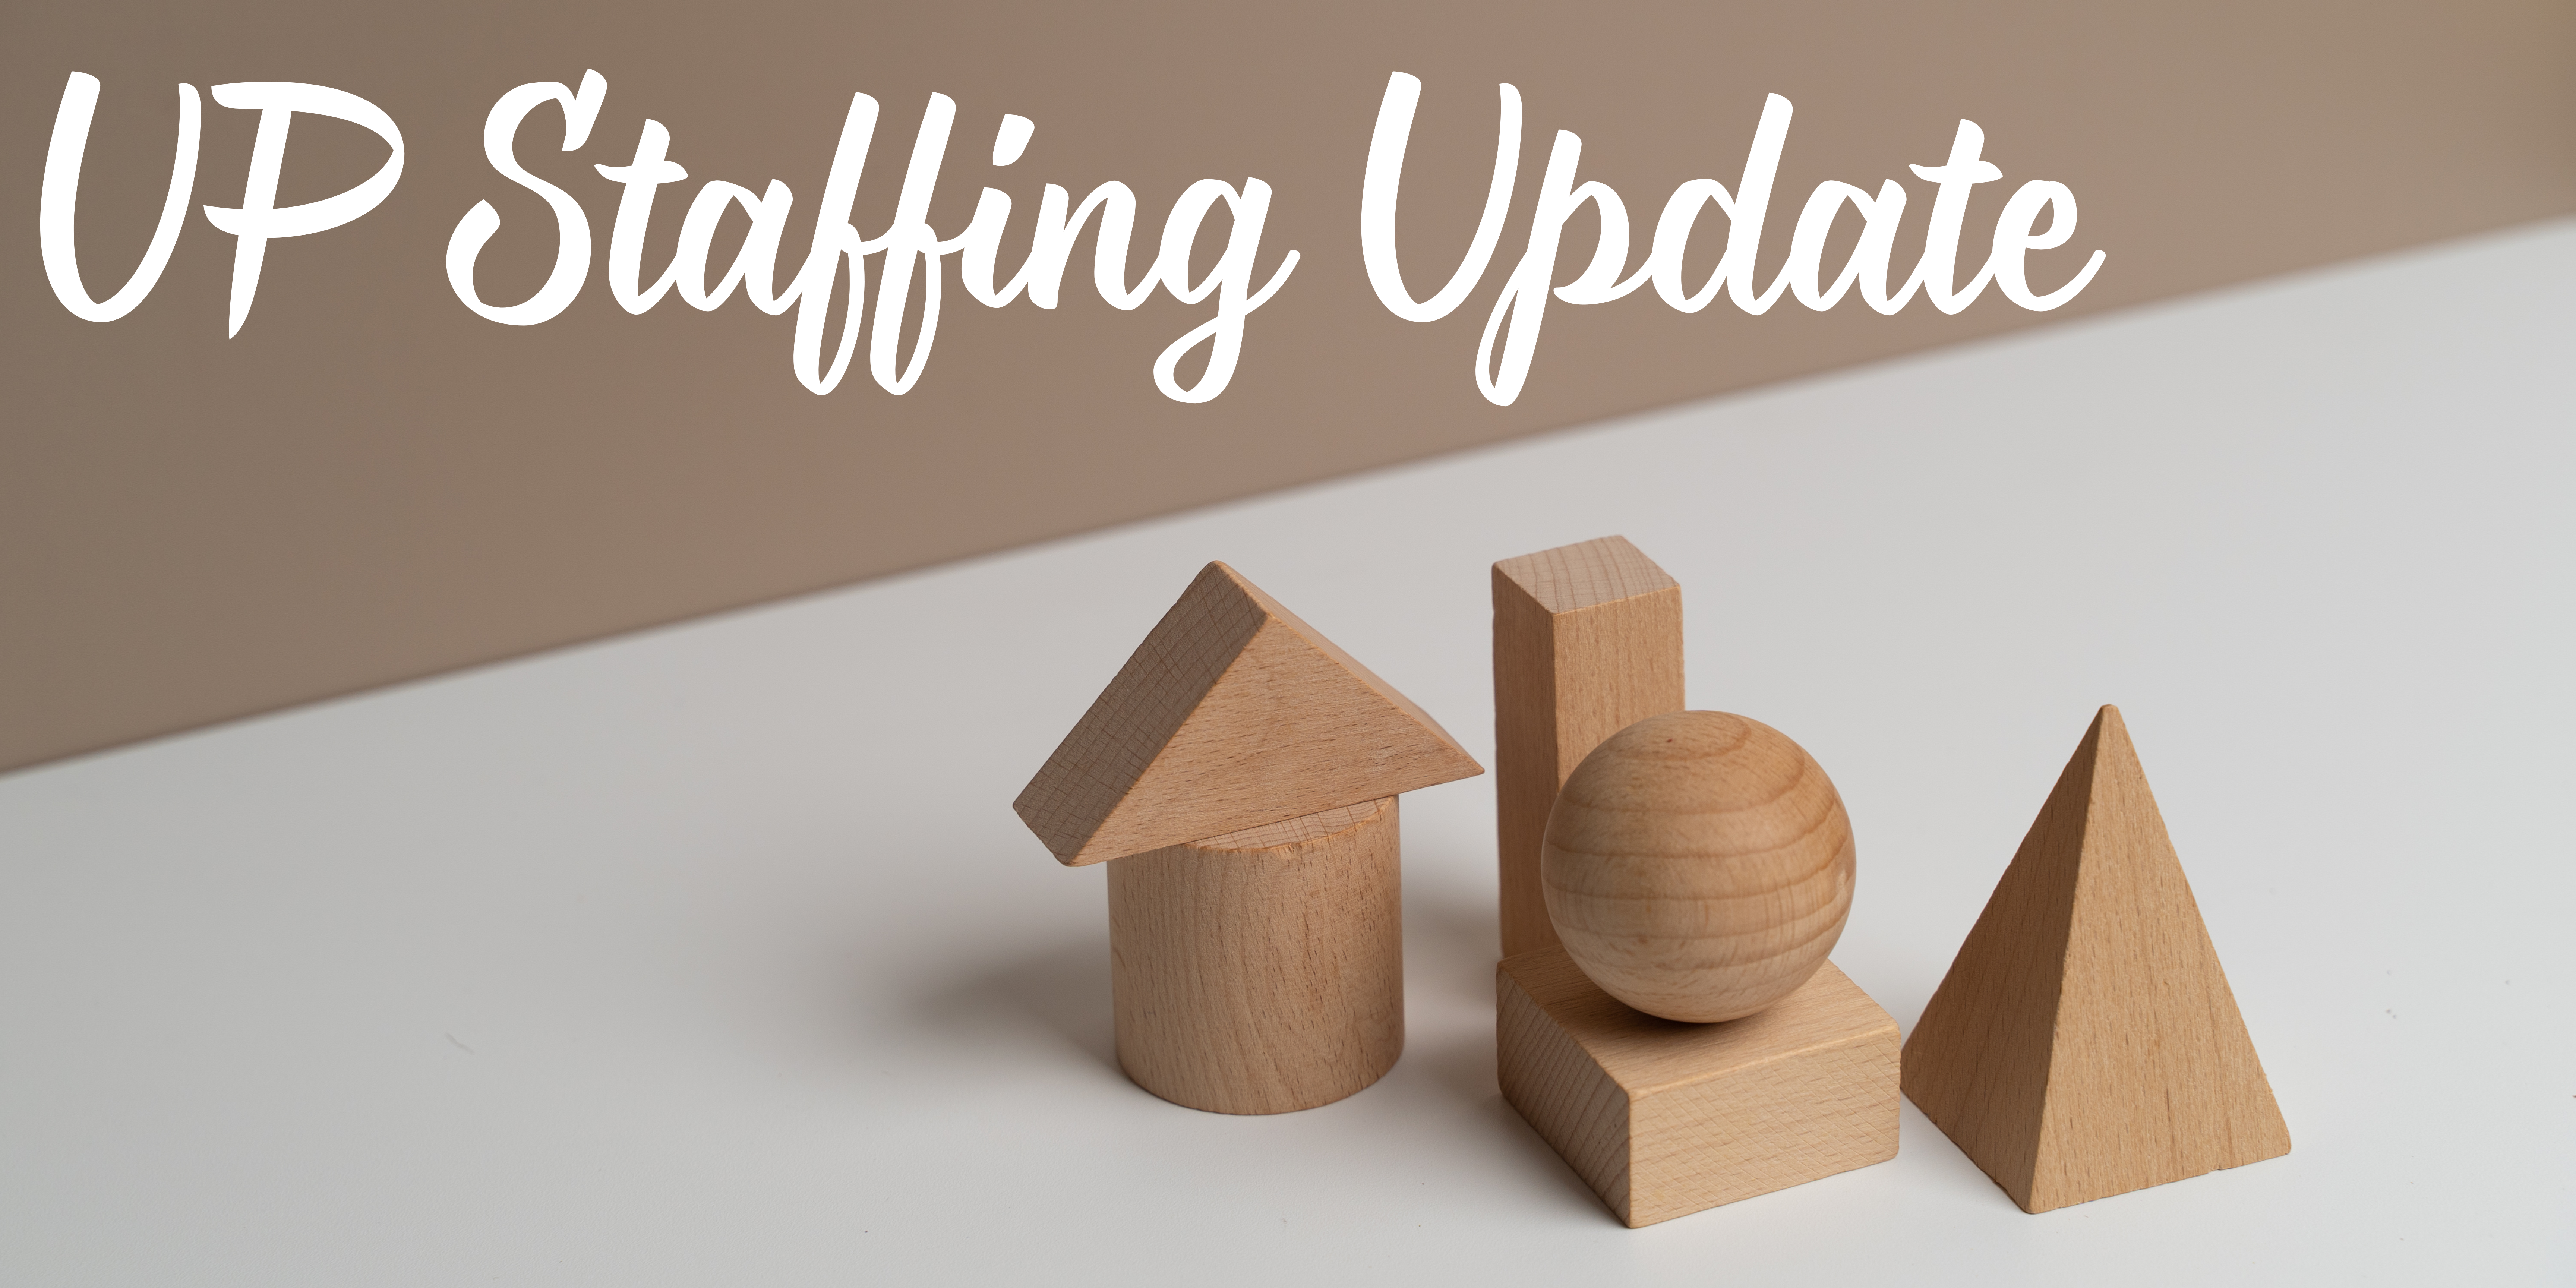 image of brown building blocks on gray background with white lettering above reading UP Staffing Update